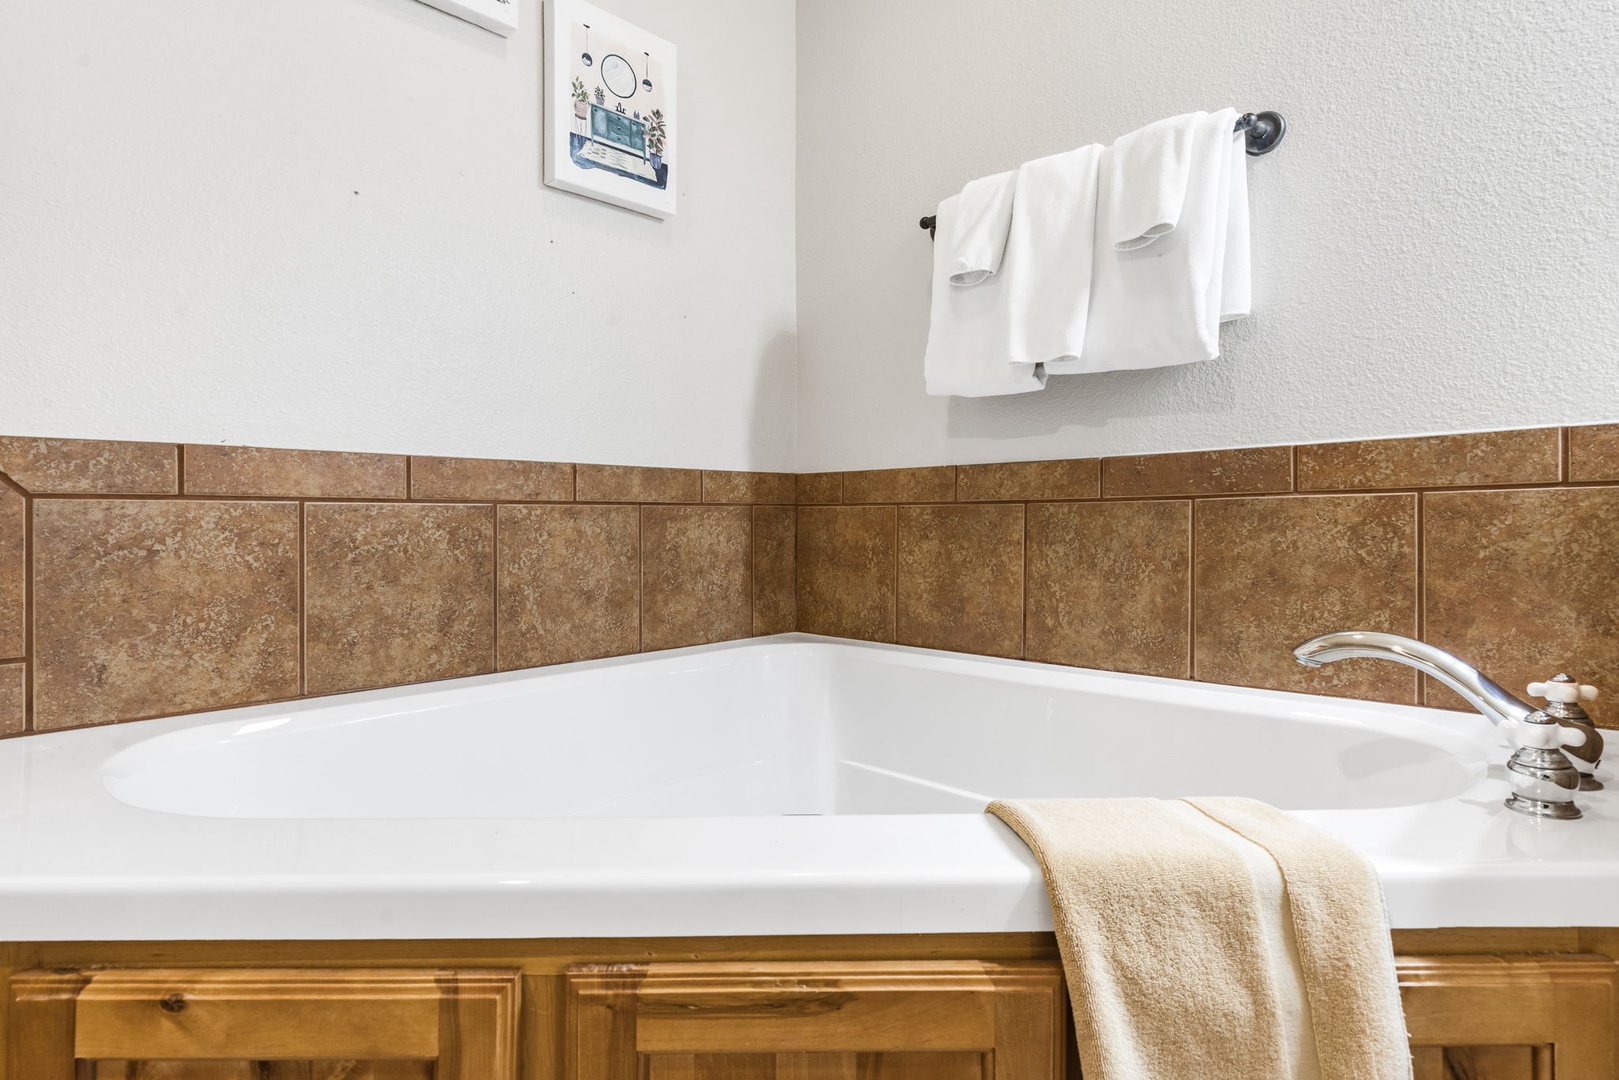 After a day spent exploring the area, spend time soaking in your luxurious corner tub